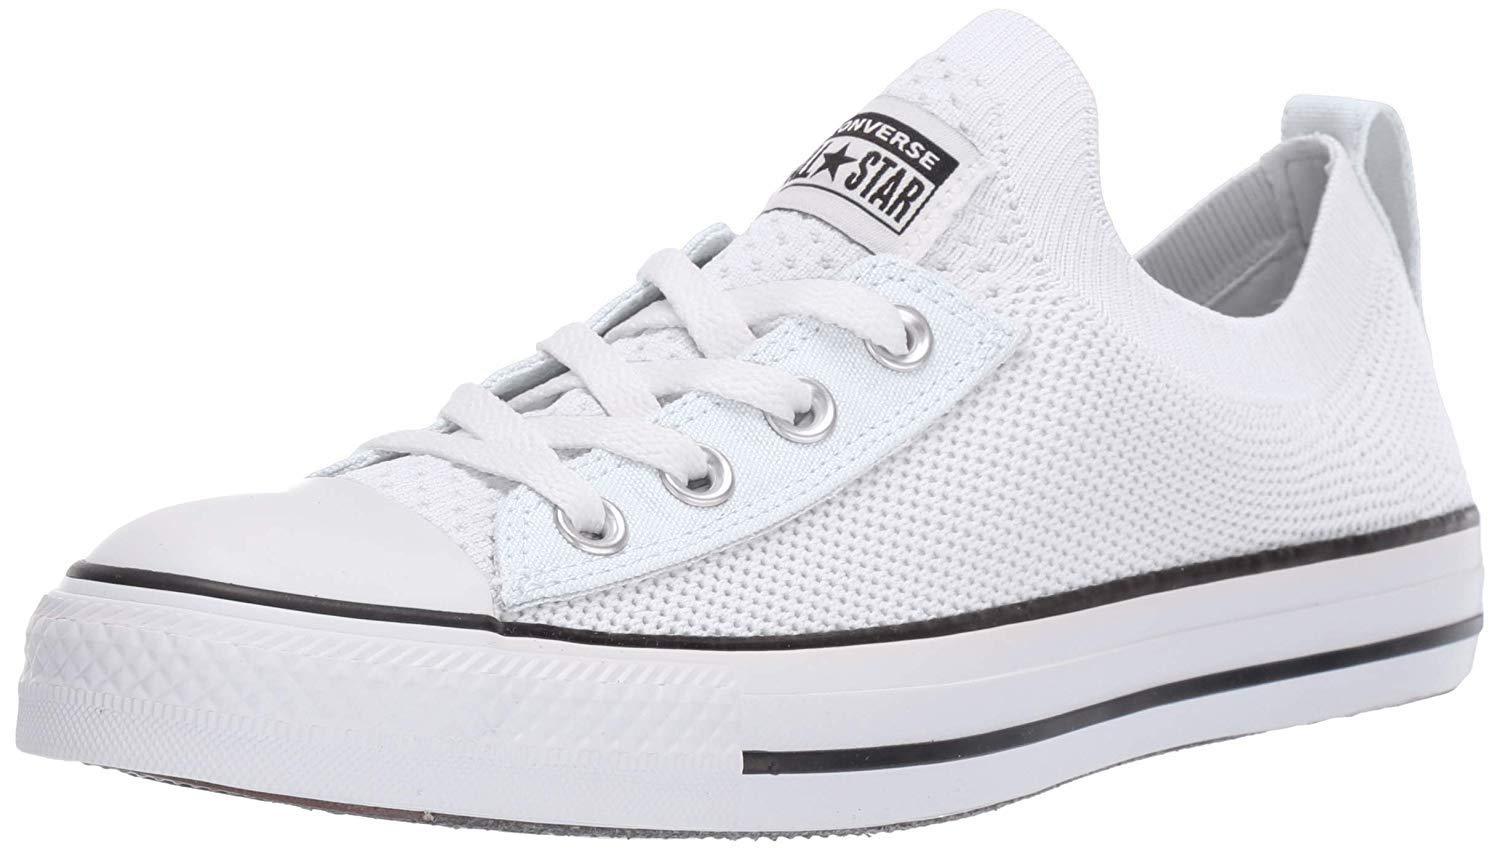 Converse Rubber Chuck Taylor Shoreline Knit Slip On Sneakers in White Black  White (White) - Save 51% | Lyst UK